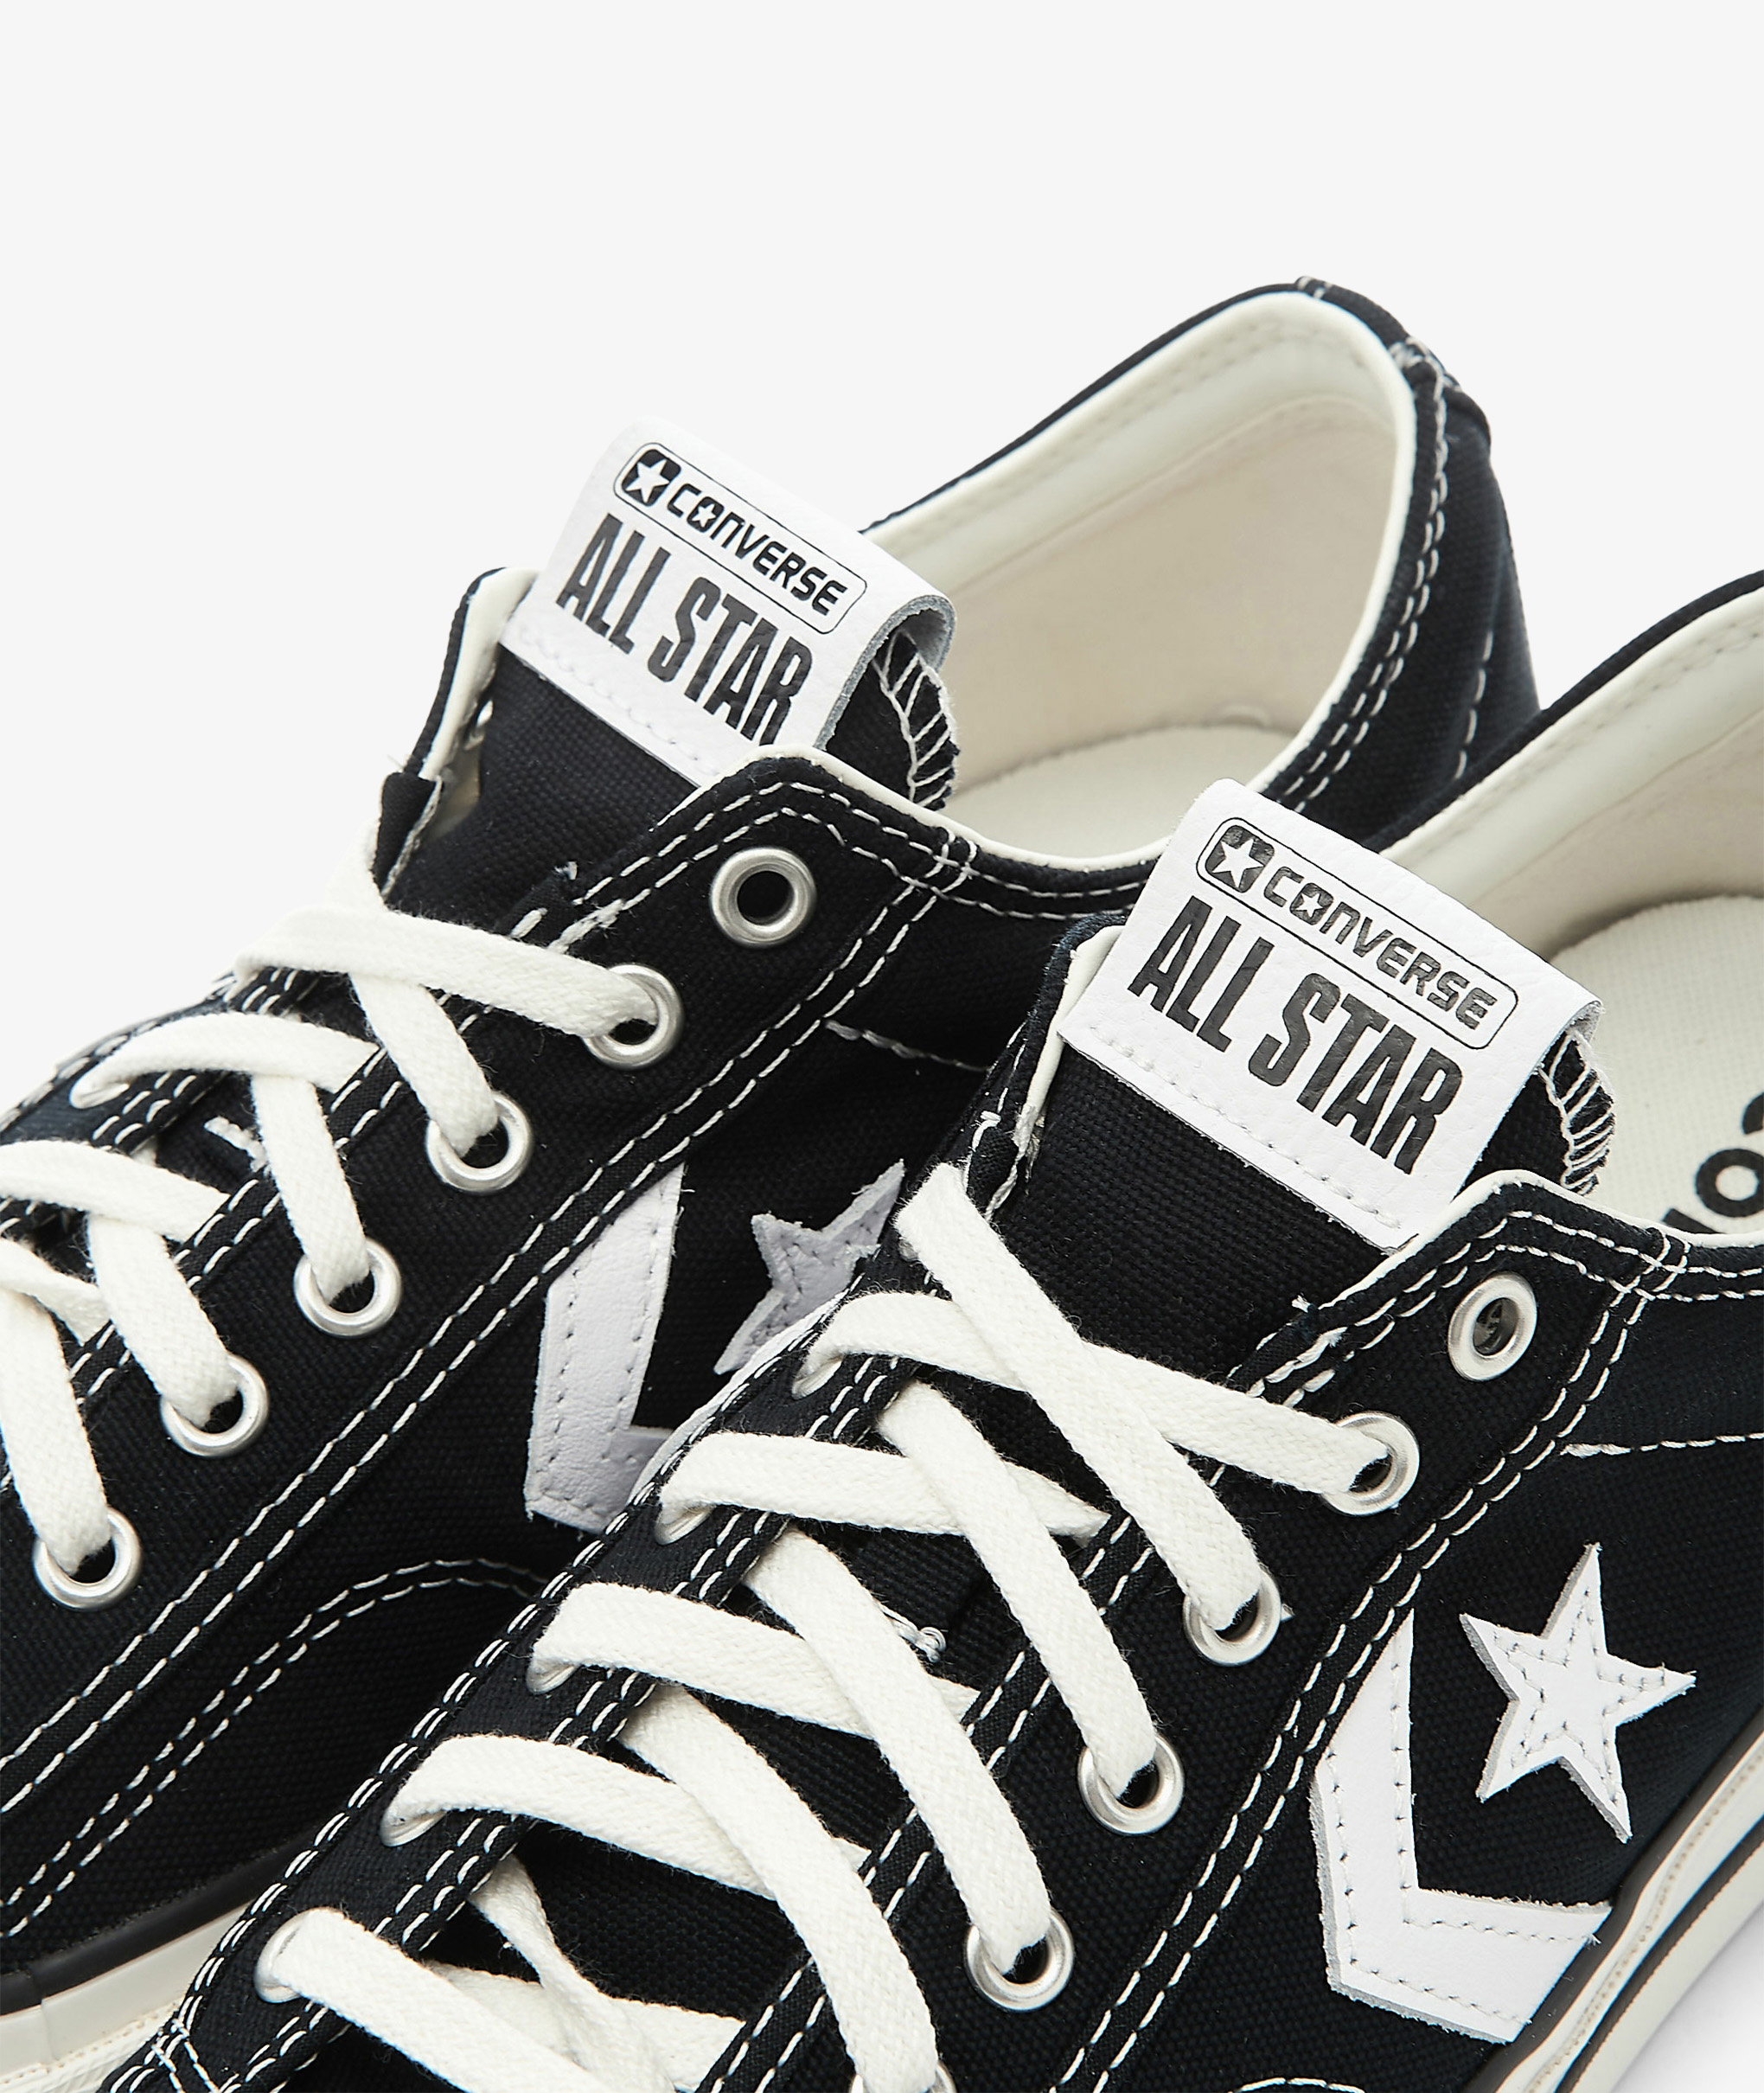 Great Barrier Reef gallon soep Norse Store | Shipping Worldwide - Converse Star Player 76 OX - Black